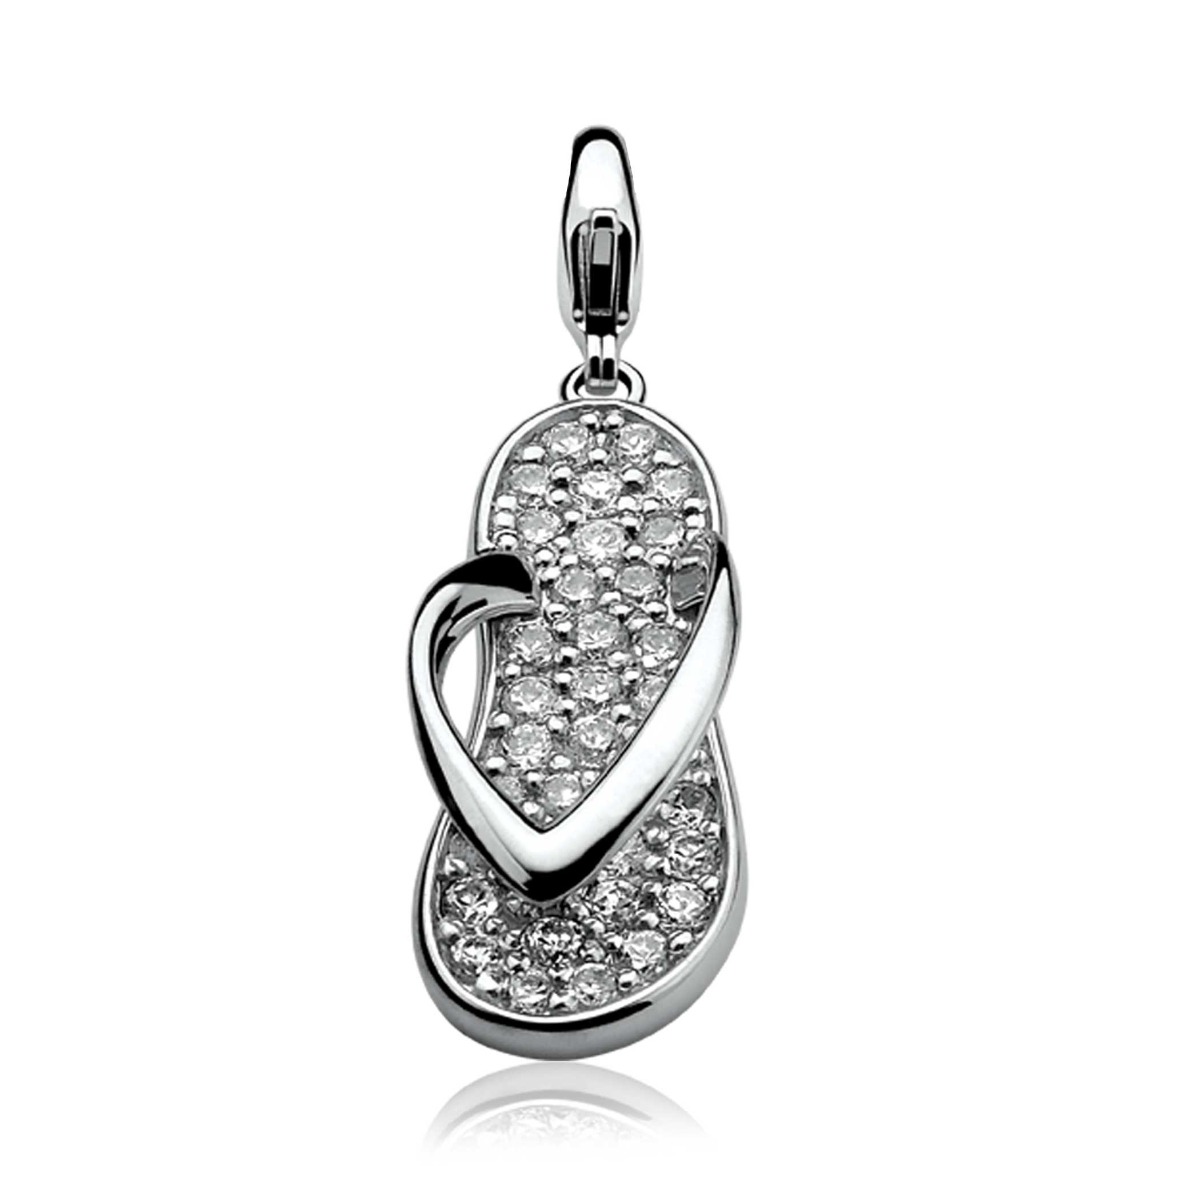 ZINZI Sterling Silver Charm White Flip Flop CHARMS280